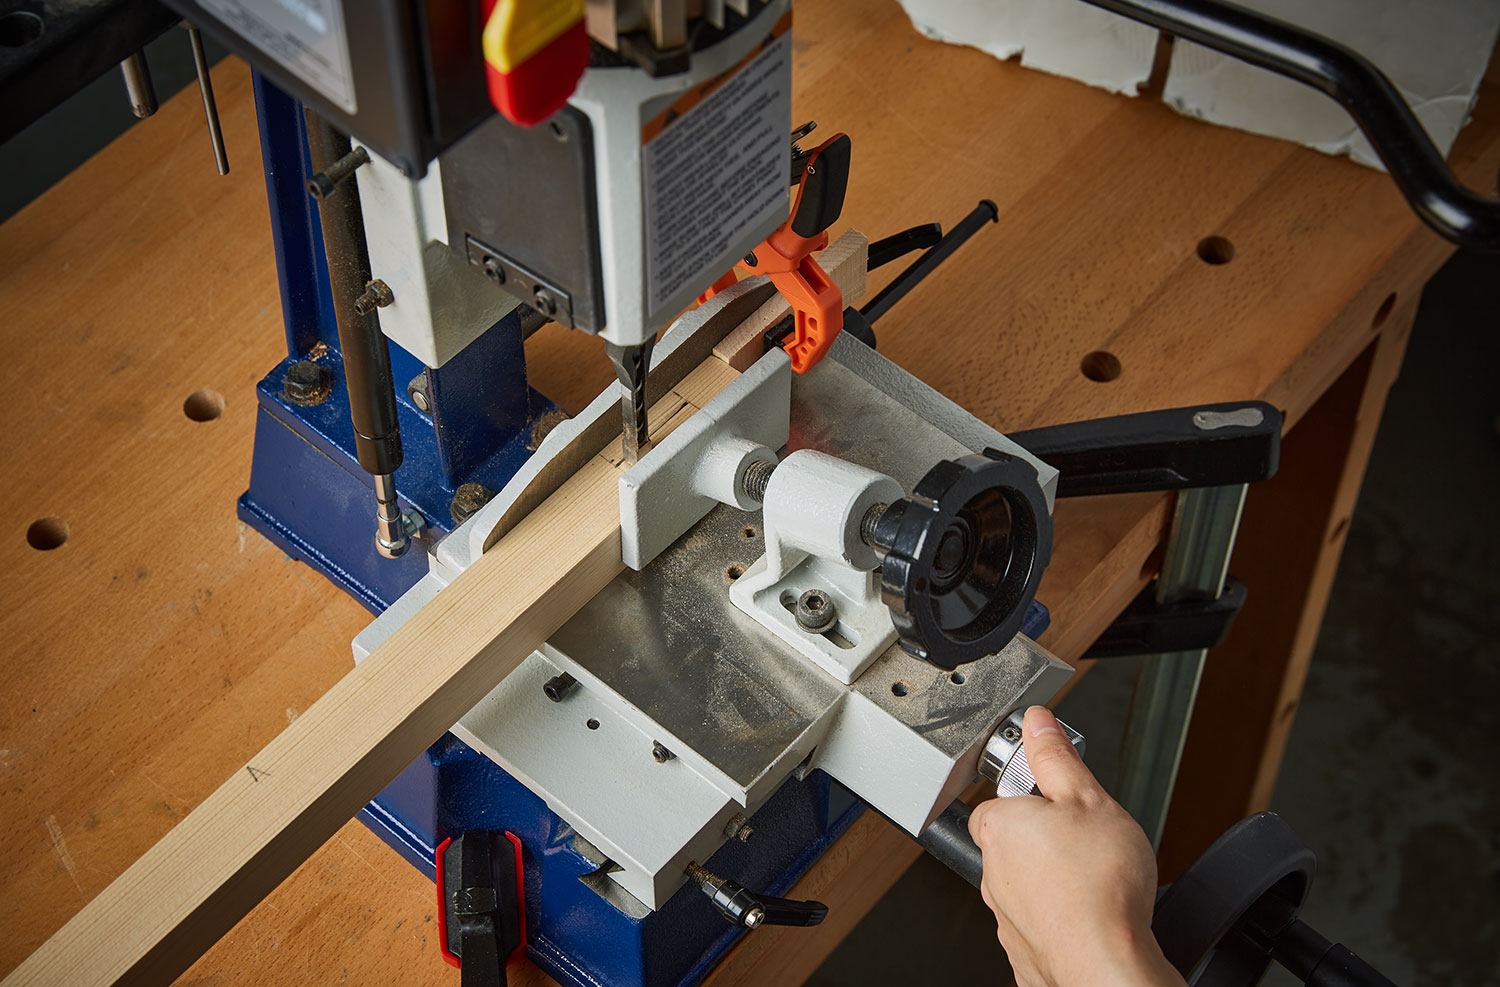 Boards are clamped in the mortiser as the micro-adjust knob is turned.